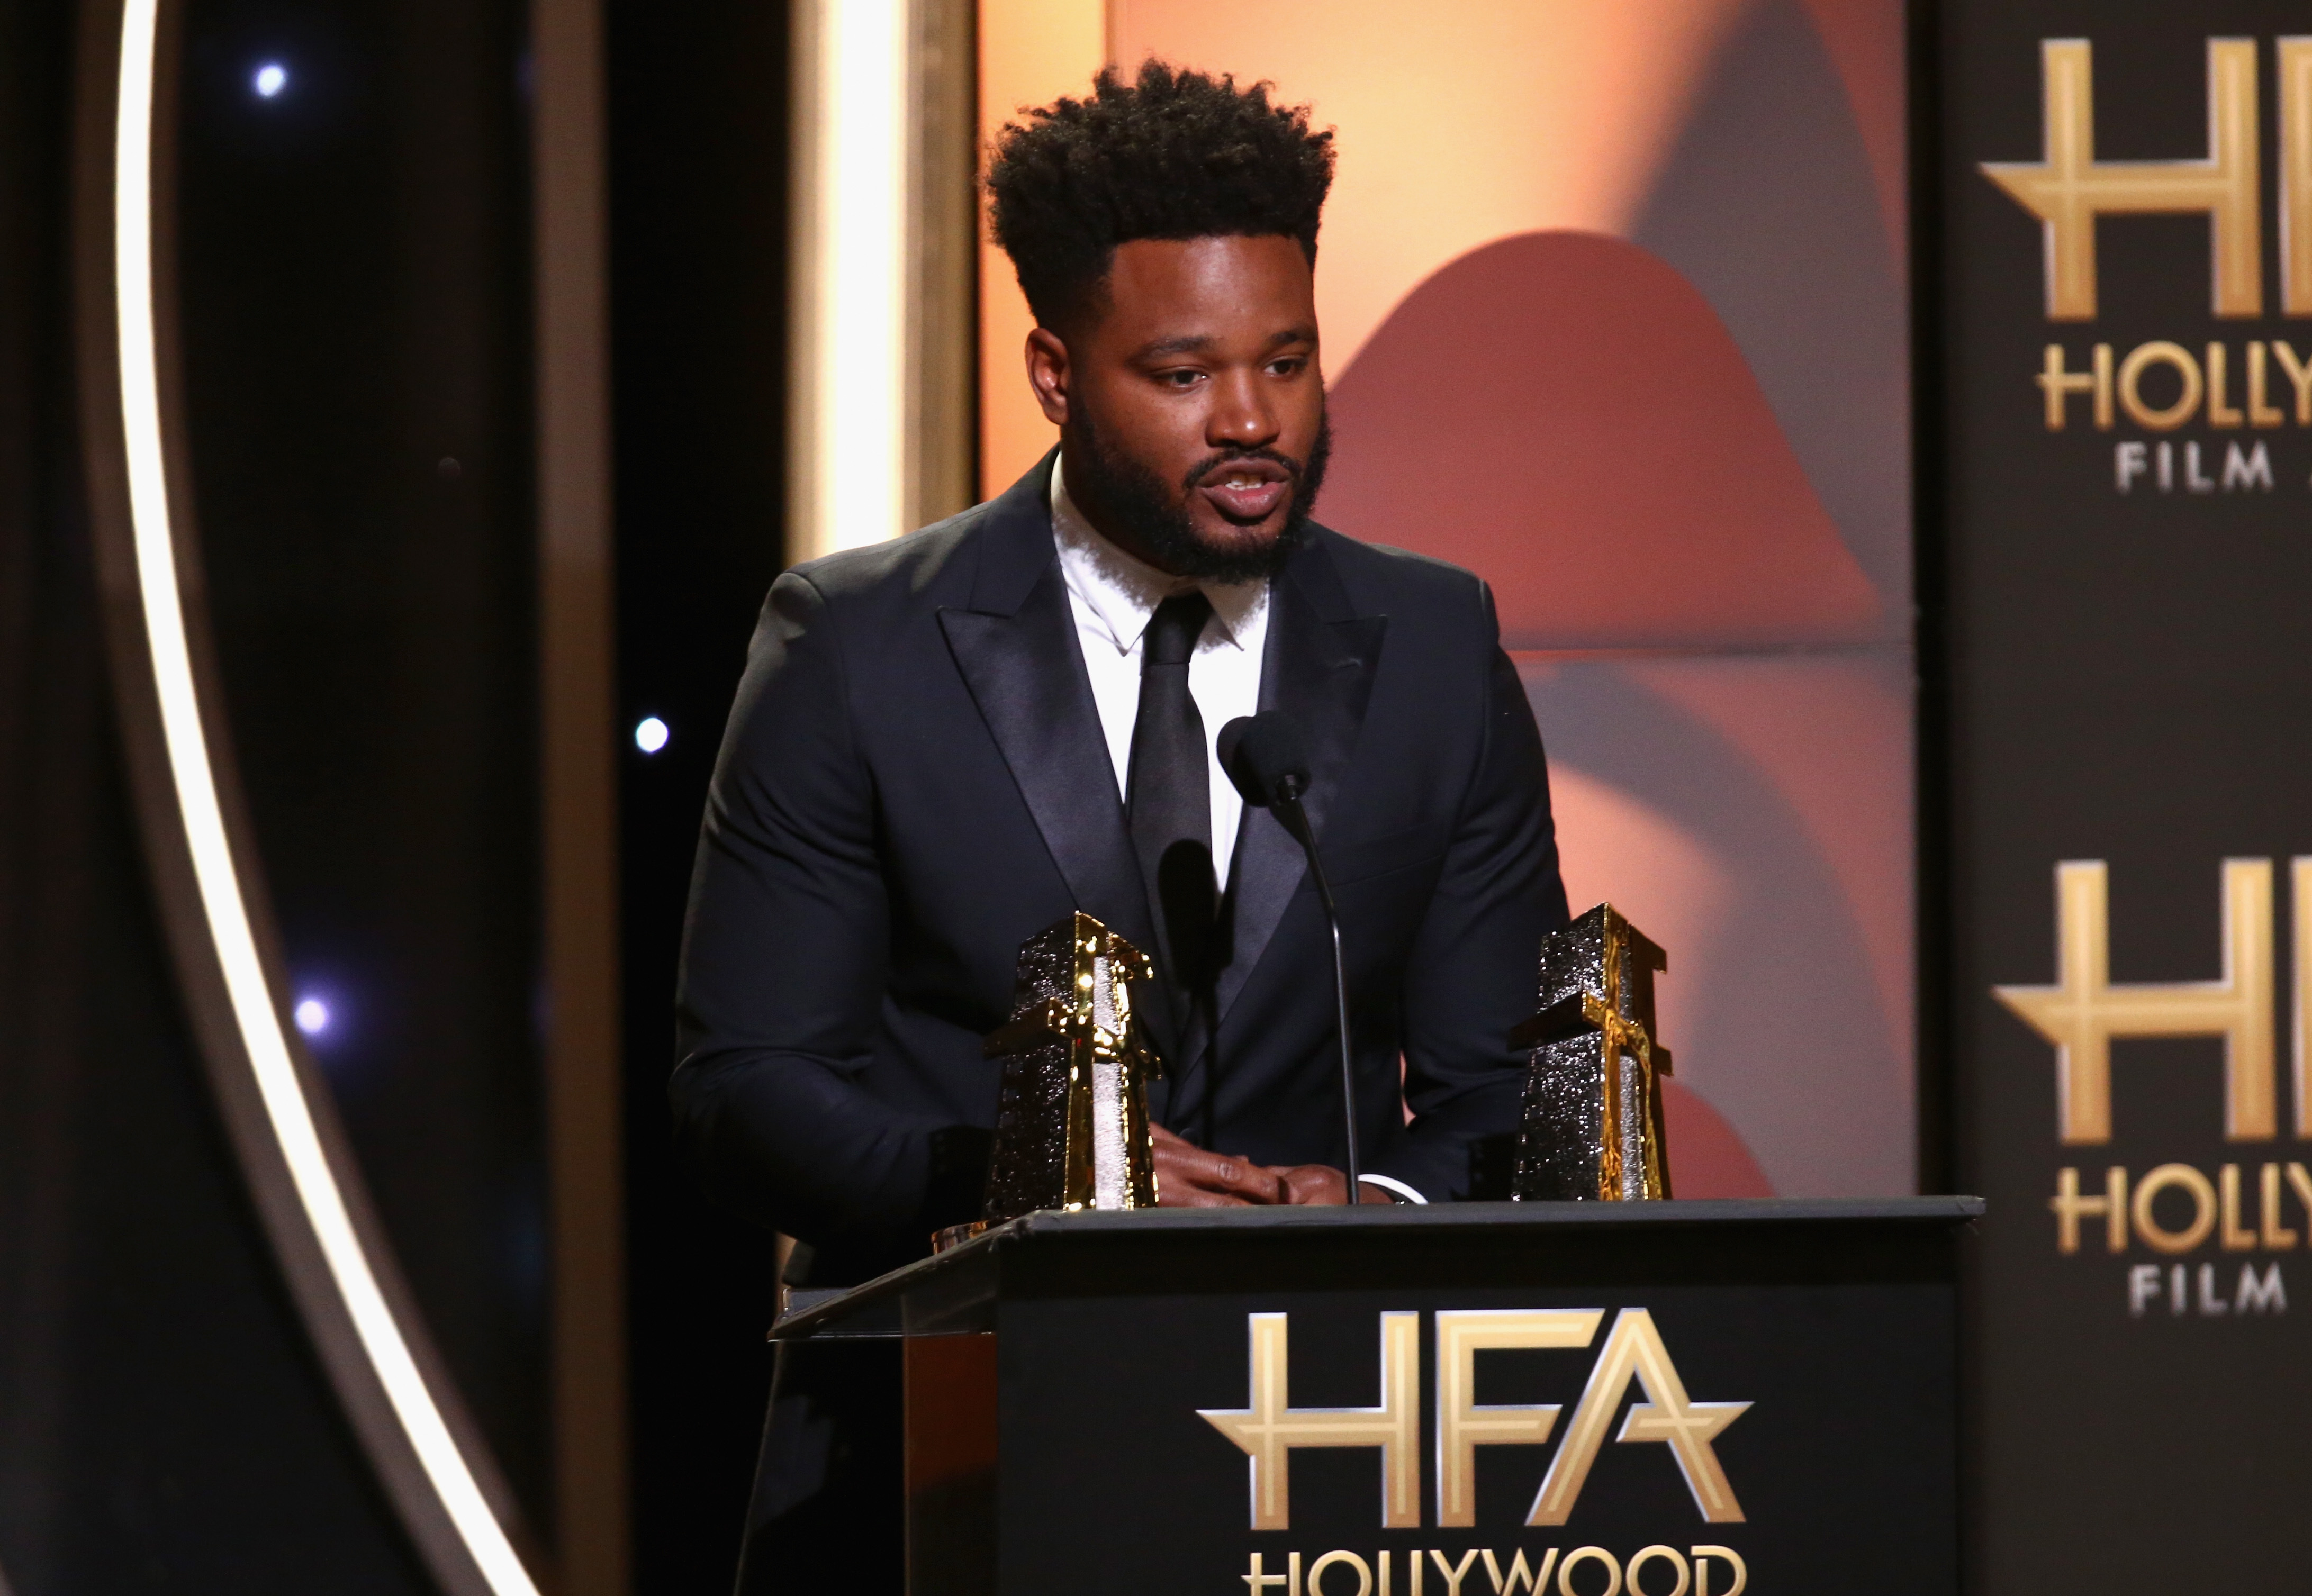 BEVERLY HILLS, CA - NOVEMBER 04: Ryan Coogler accepts the Hollywood Film Award for "Black Panther" onstage during the 22nd Annual Hollywood Film Awards at The Beverly Hilton Hotel on November 4, 2018 in Beverly Hills, California. (Photo by Tommaso Boddi/Getty Images)